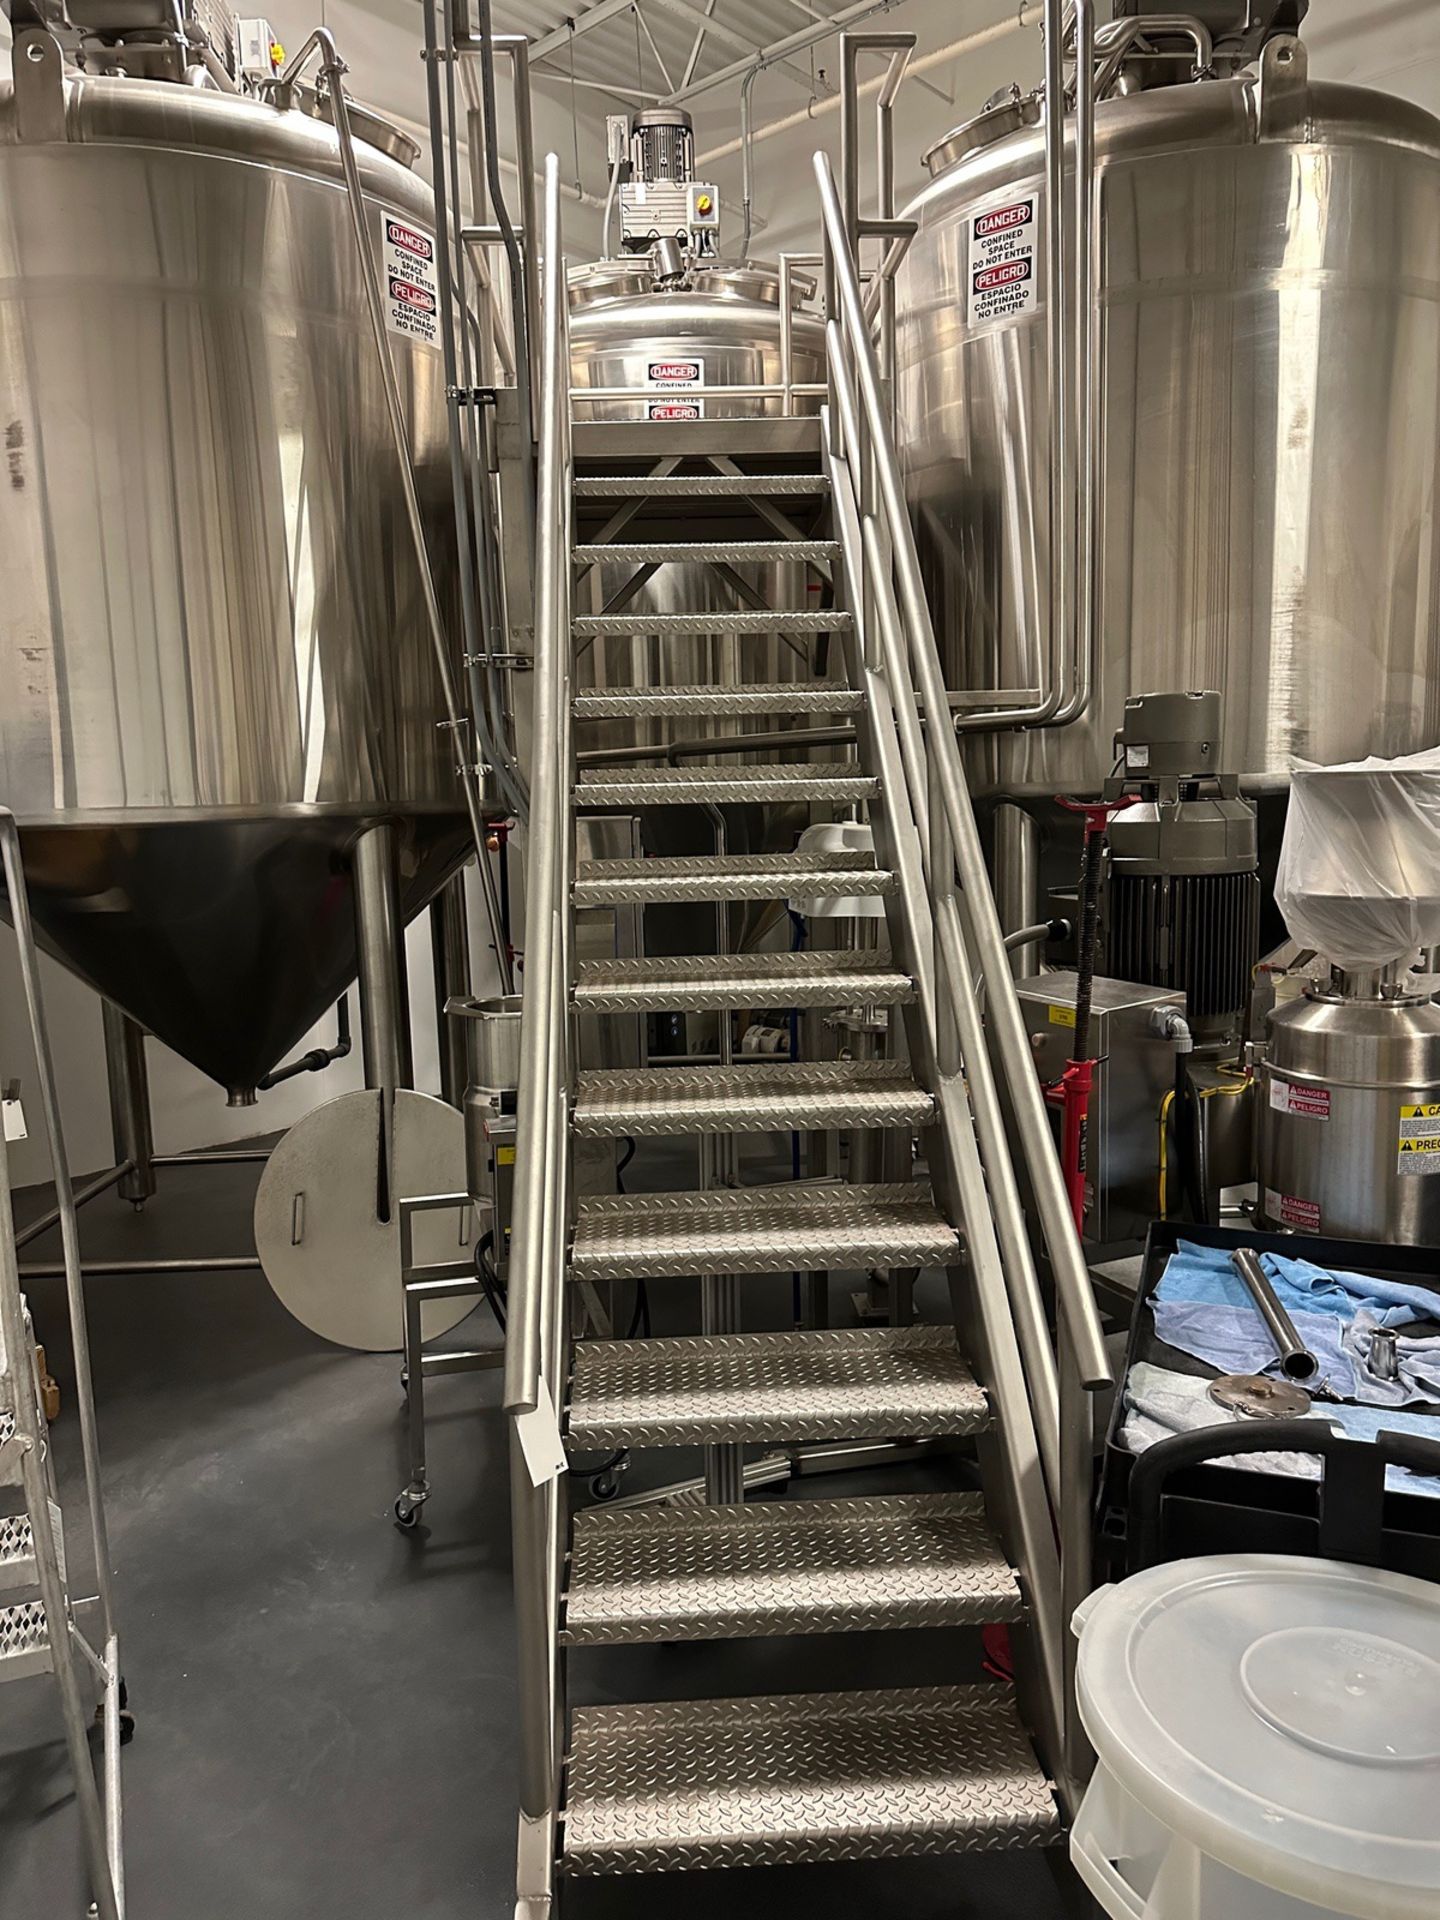 13-Step Stainless Steel Stairwell with Approx. 5' x 4' Platform, 9'6" From Floor | Rig Fee $600